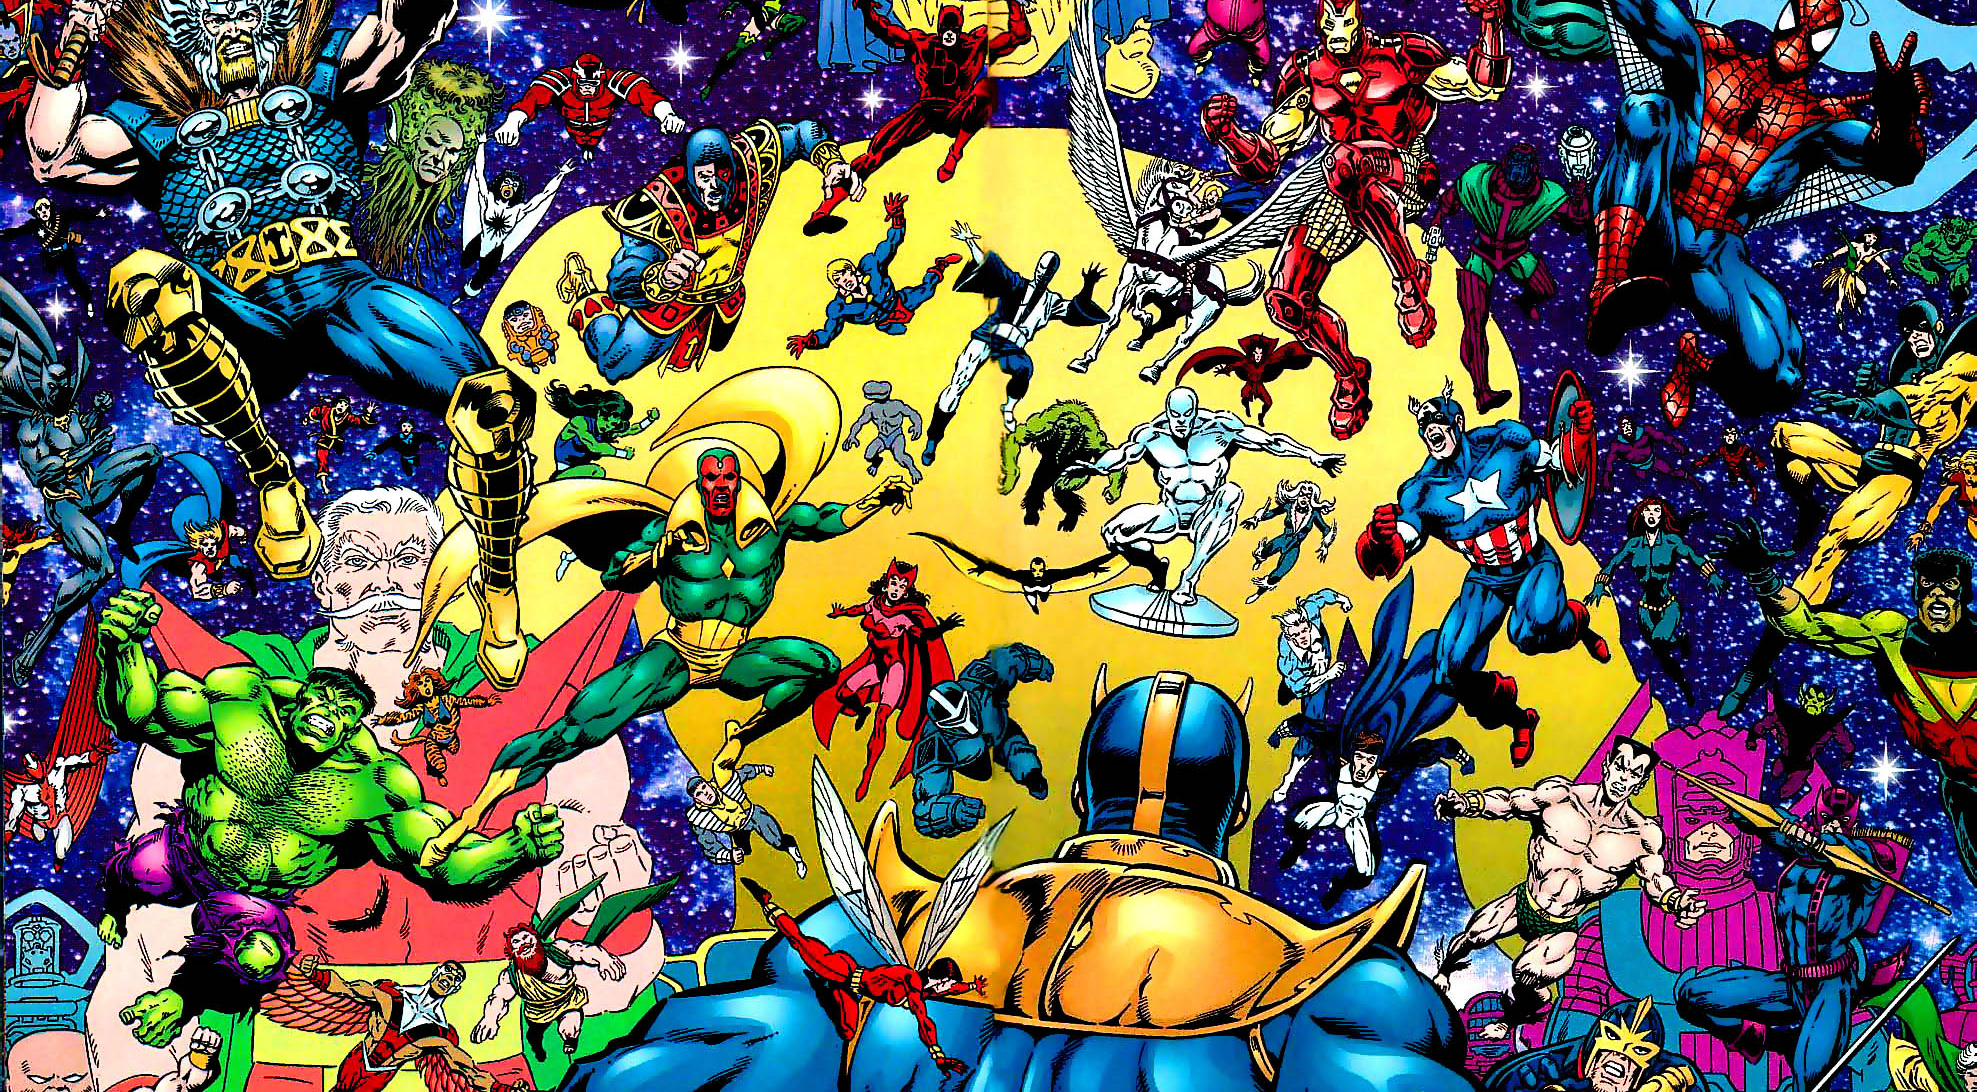 In 'Marvel Universe: The End' (2003) #5, Thanos faces the Marvel Universe assembled.